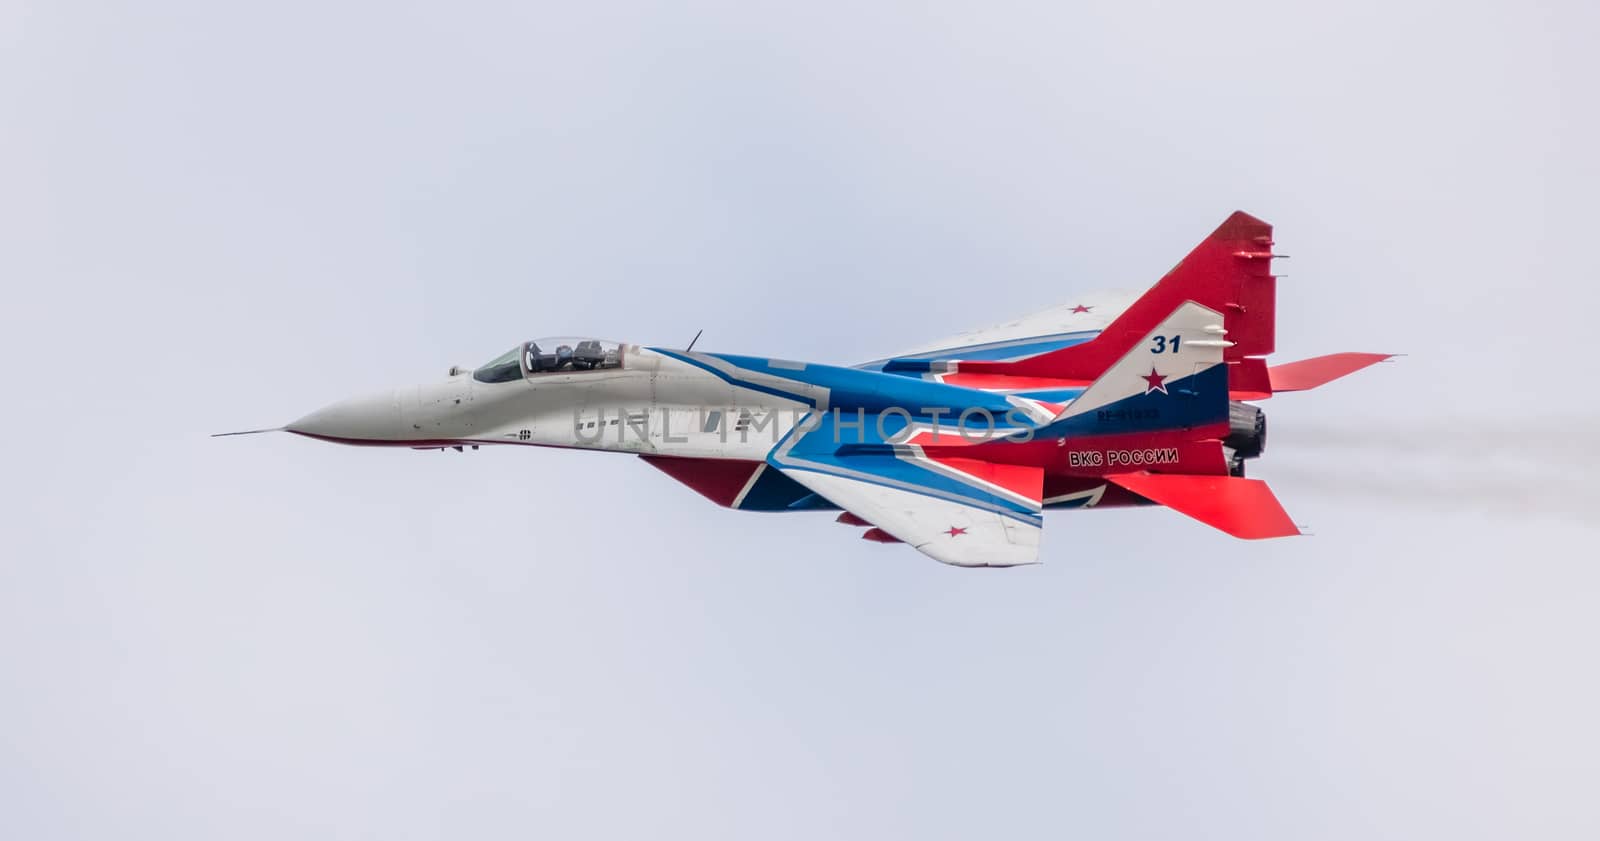 Barnaul, Russia - September 19, 2020: A close-up shot of Strizhi MiG-29 fighter jet performing stunts during an aeroshow.